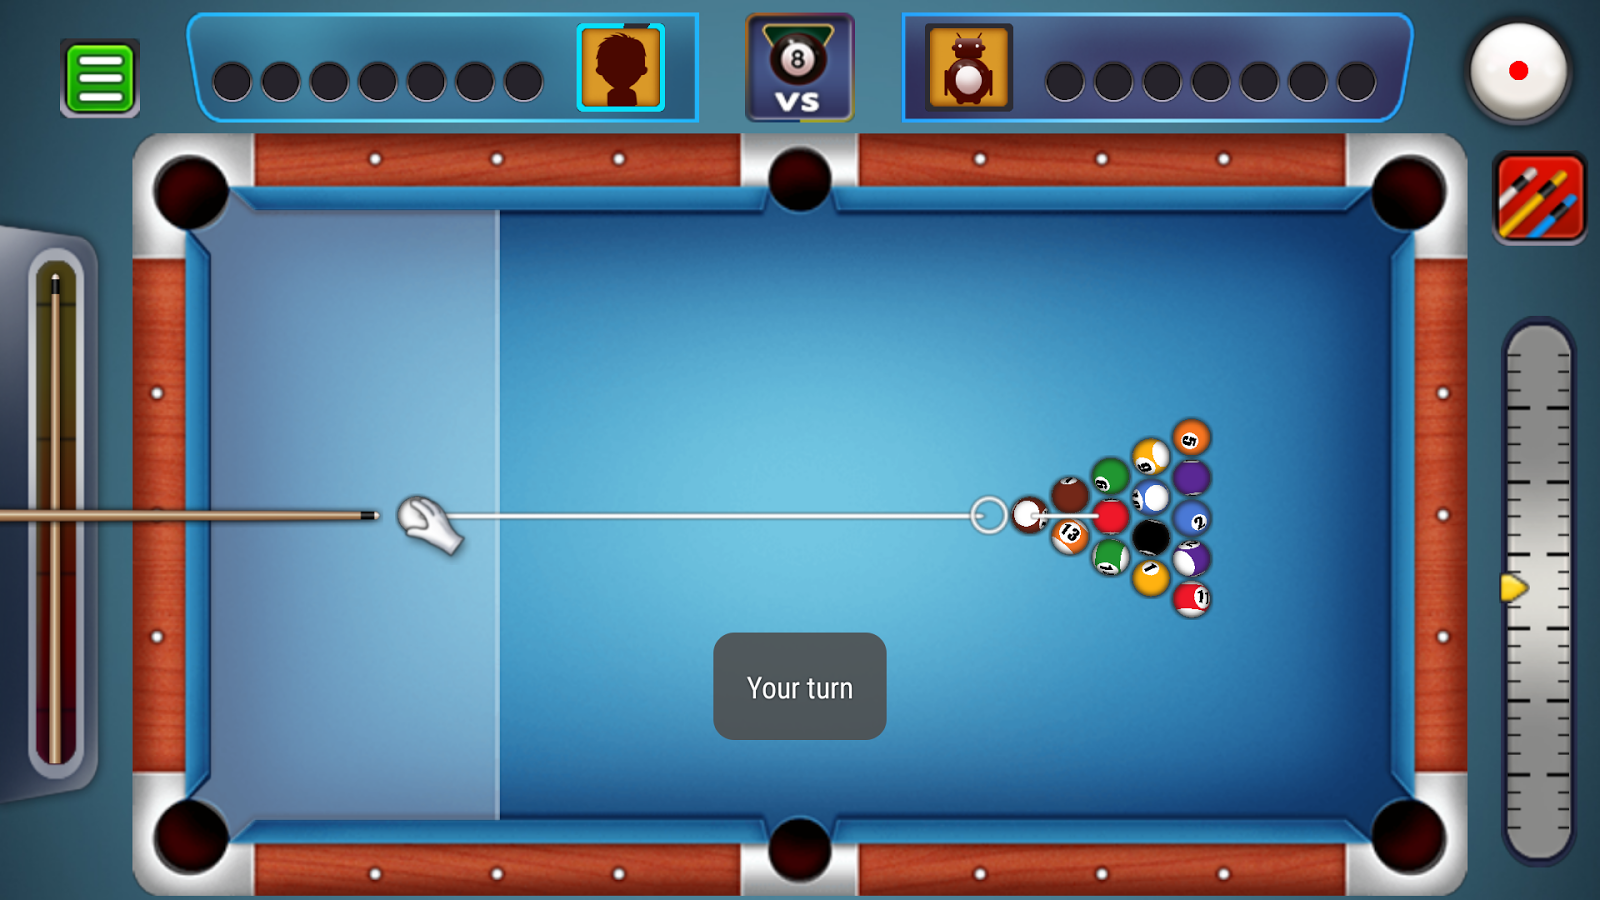 8 Ball Snooker Pool 1.0.0 APK Download - Android Sports Games - 